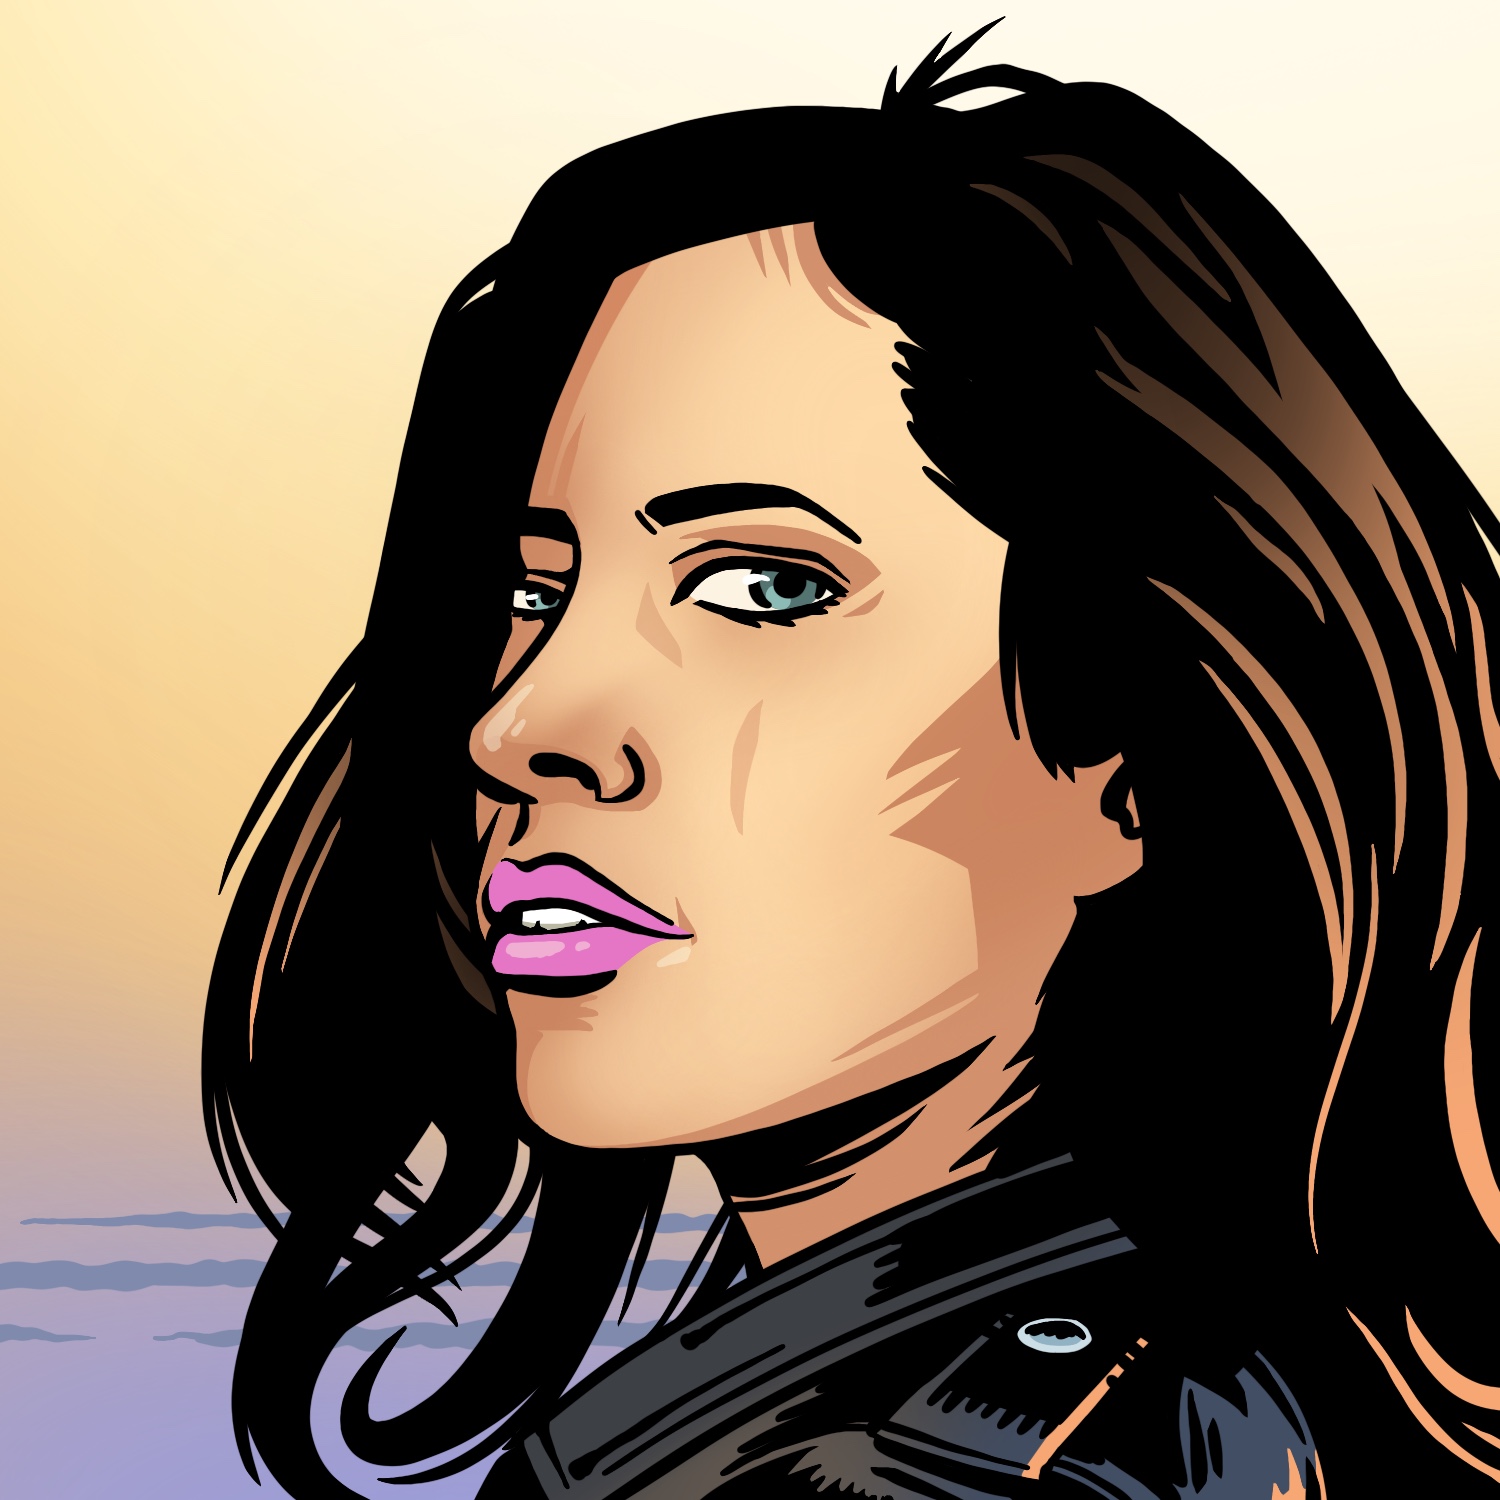 An illustration of a woman facing to the left, looking back at the viewer. The woman has a light complexion, teal eyes, and dark hair. She has pink lipstick on and is wearing a dark leather jacket. Her hair has a bright orange highlight on the right, and the background is a blur of sunset sky and land. The drawing is done as a comic book style, with harsh black shadows and outlines.